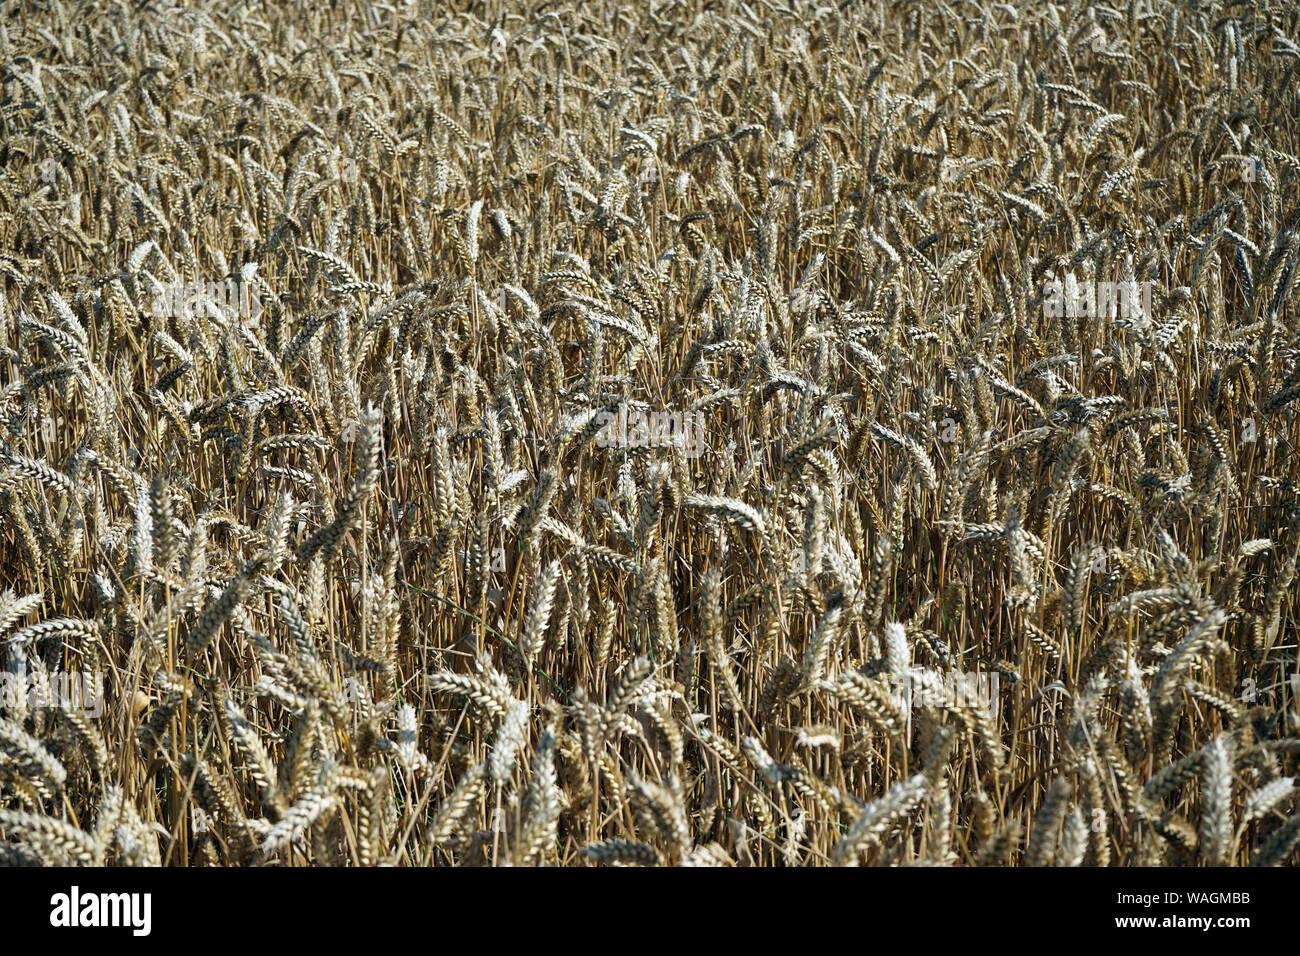 Wheat field in farm ibefore harvest Stock Photo